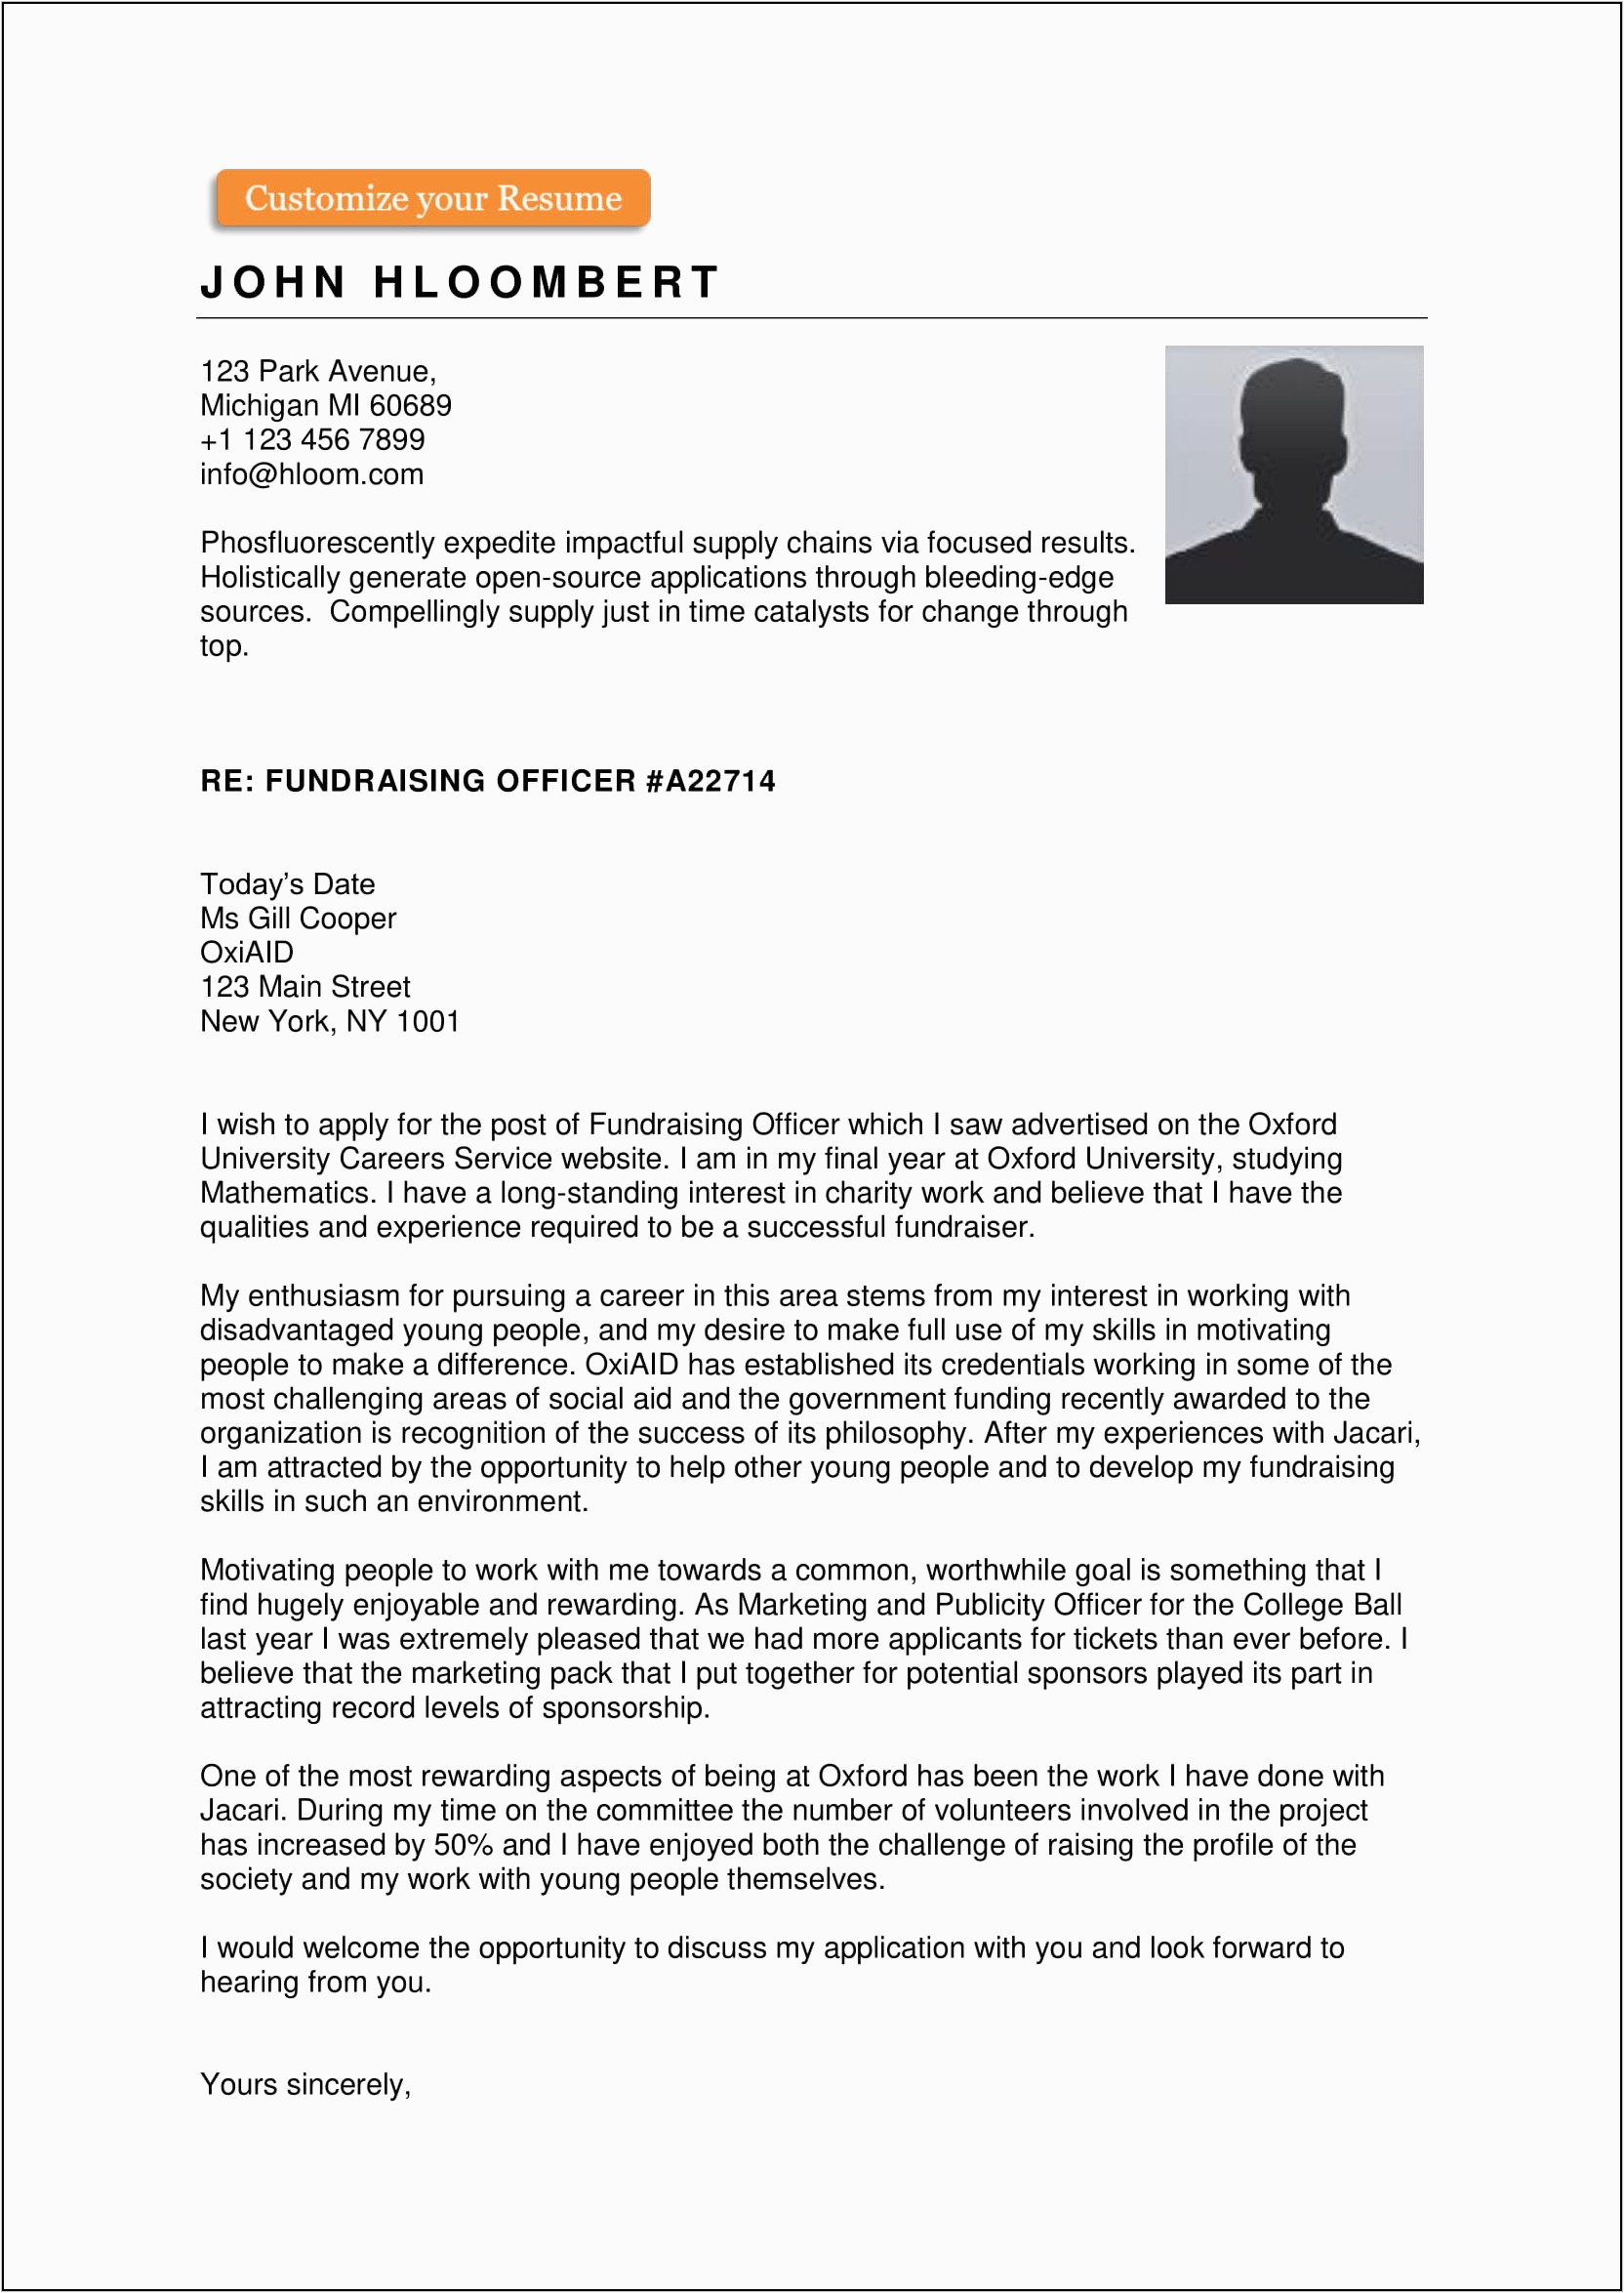 Resume Cover Letter Sample It Professional Resume Cover Letter Sample Free Download